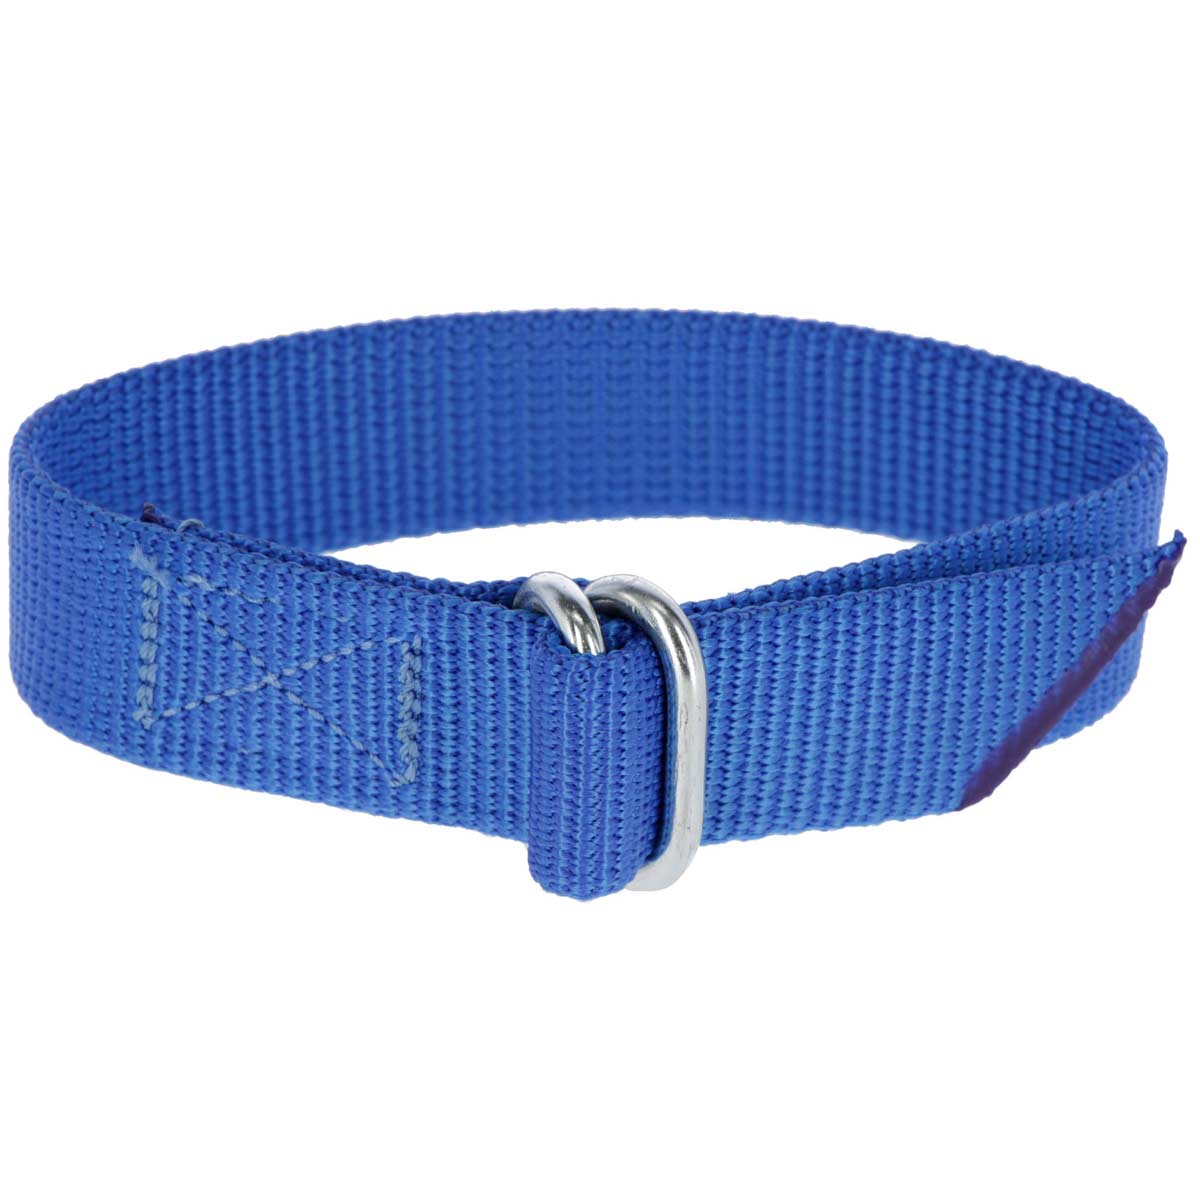 Fetlock Strap for Leg Band Numbers blue